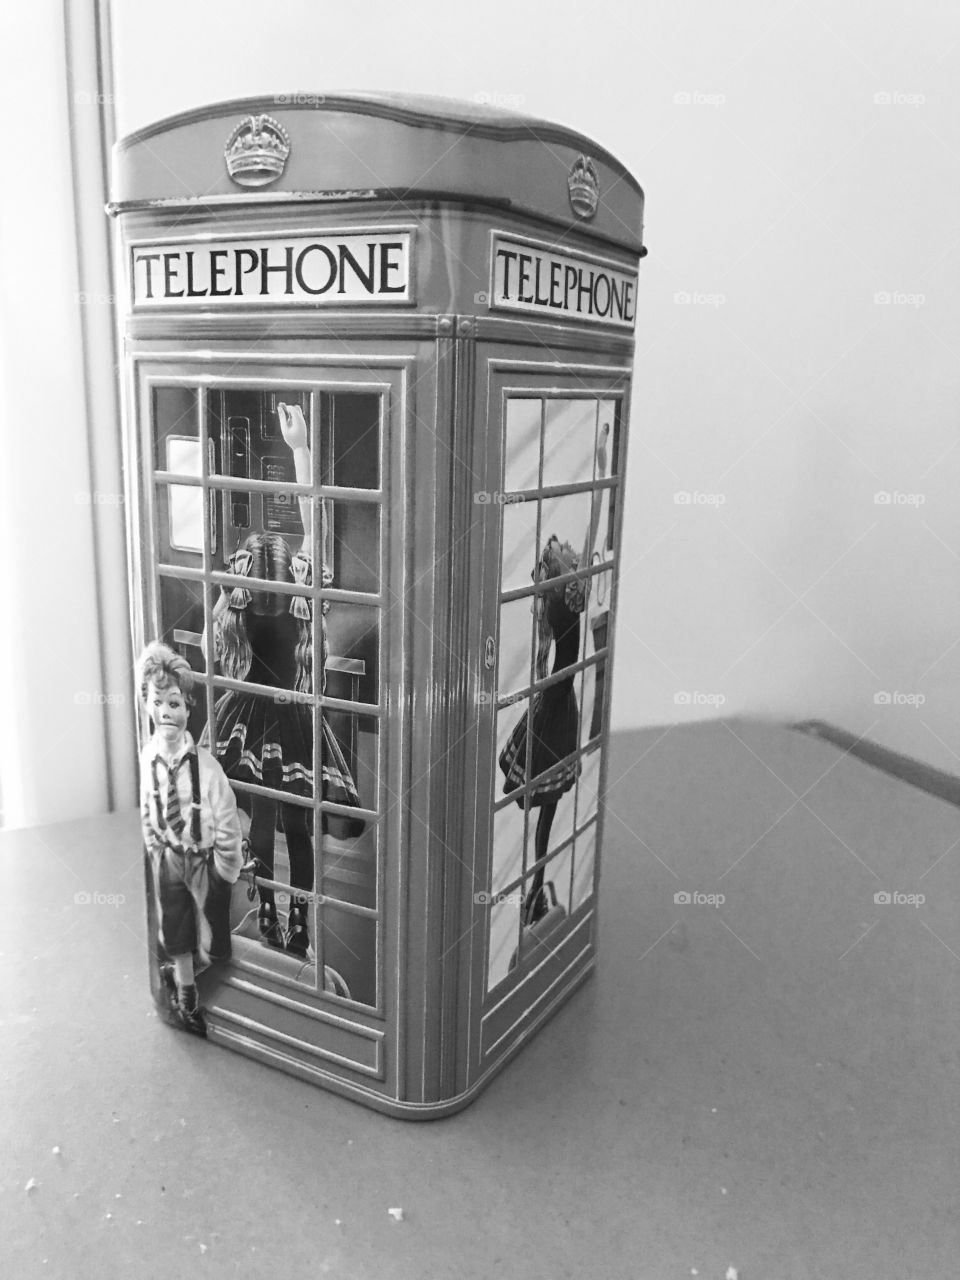 Telephone booth-telephone-sweets